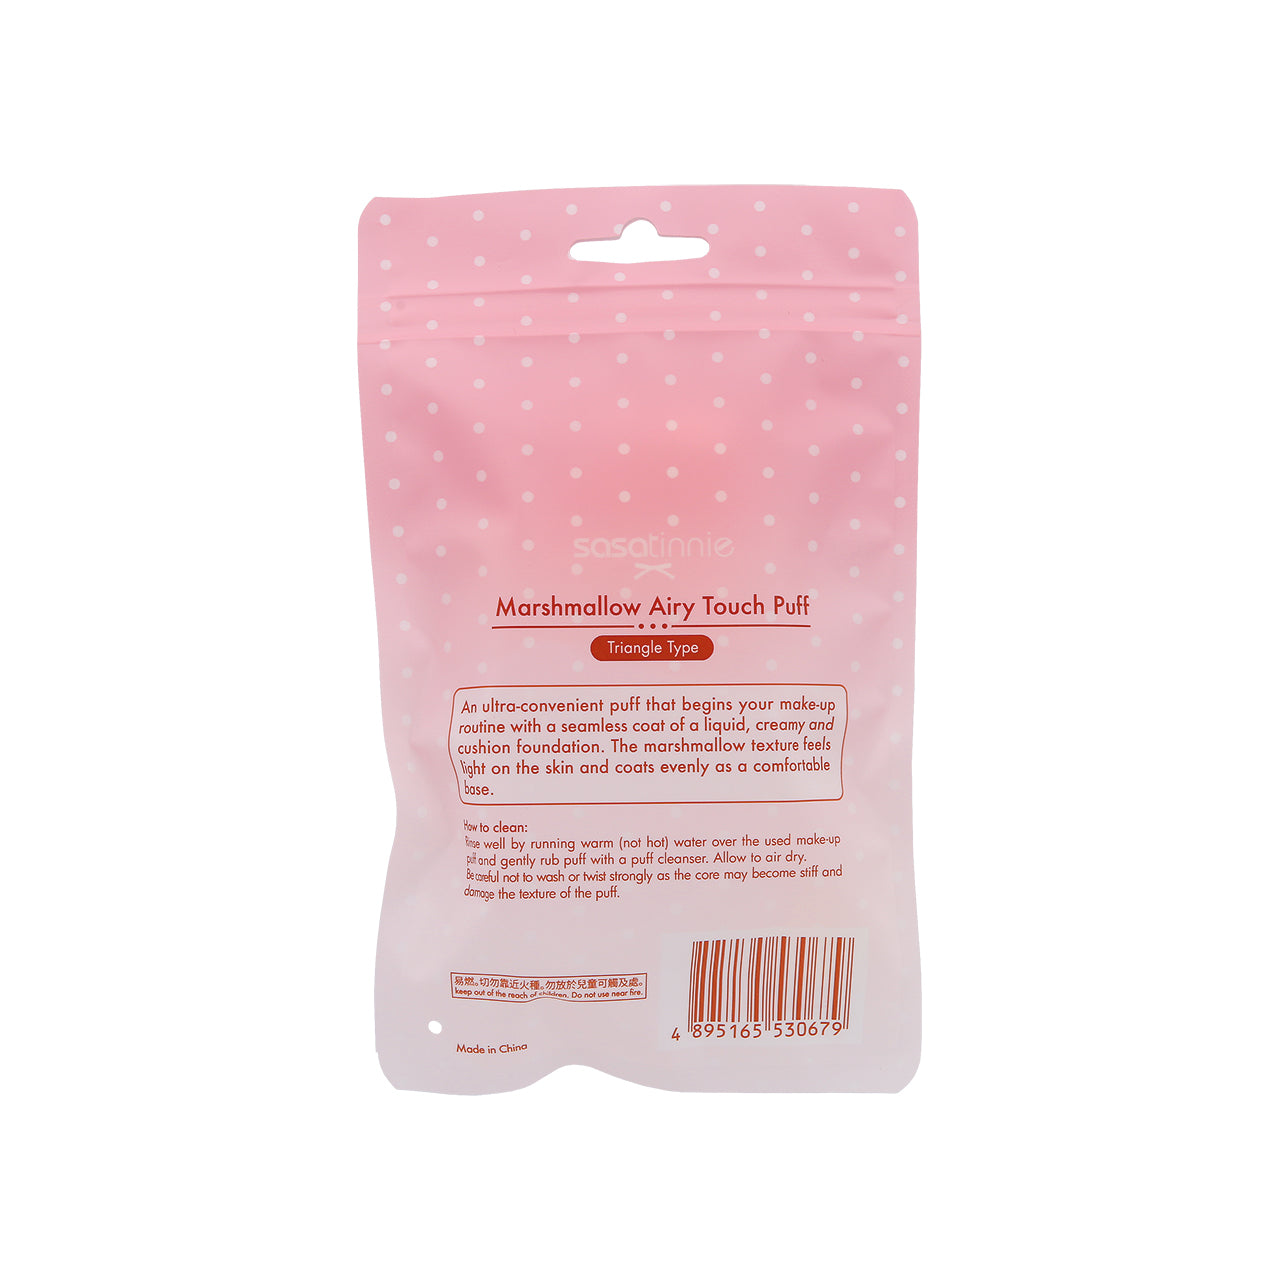 Sasatinnie Marshmallow Airy Touch Puff, Triangle 1pc